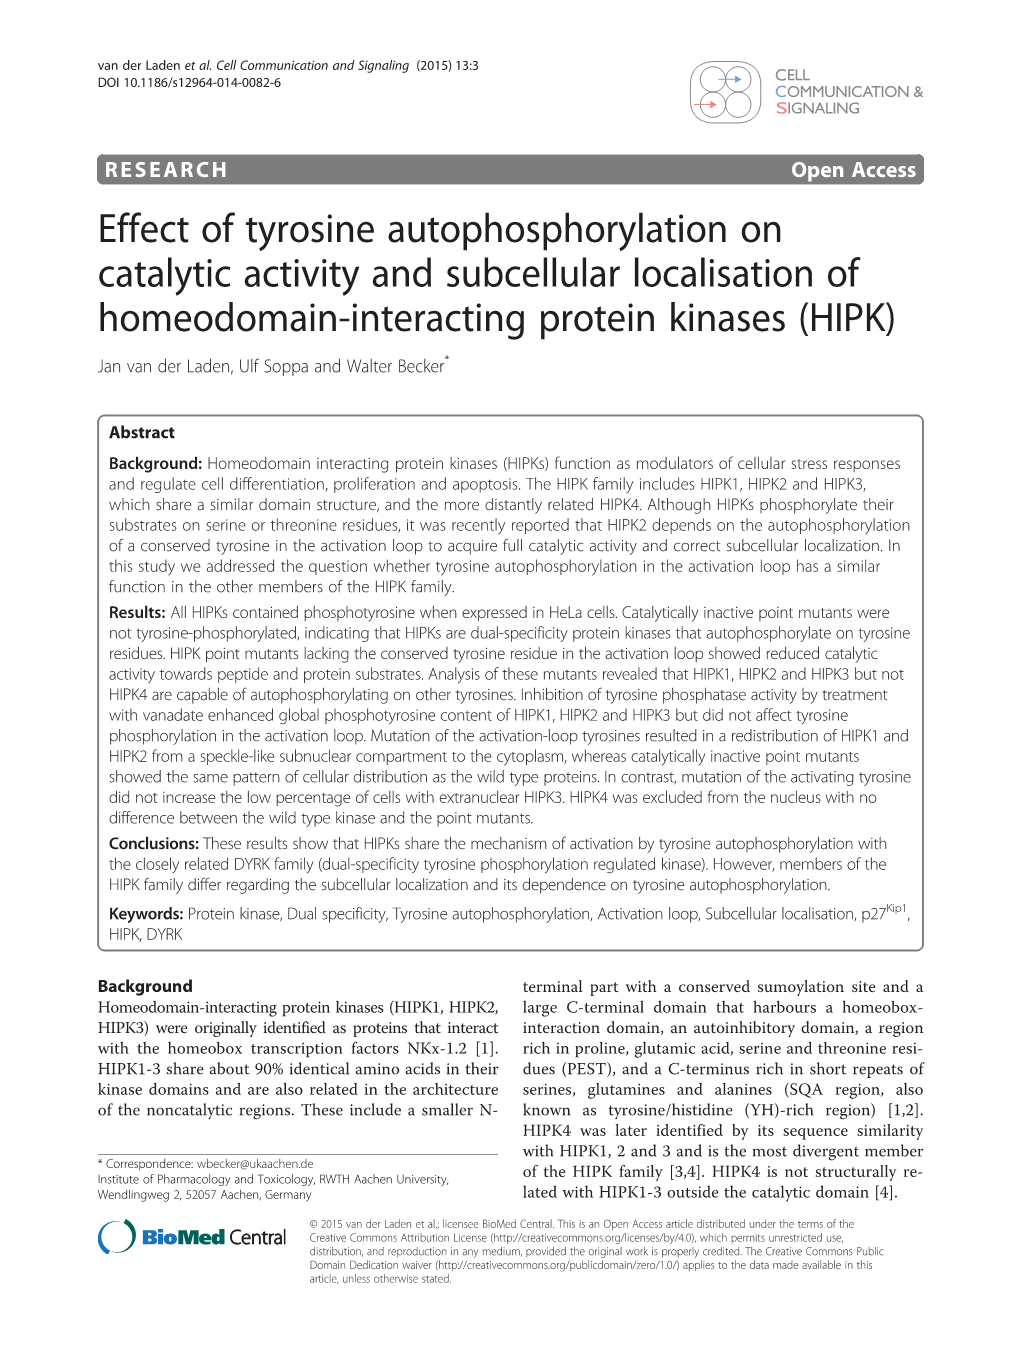 Effect of Tyrosine Autophosphorylation on Catalytic Activity and Subcellular